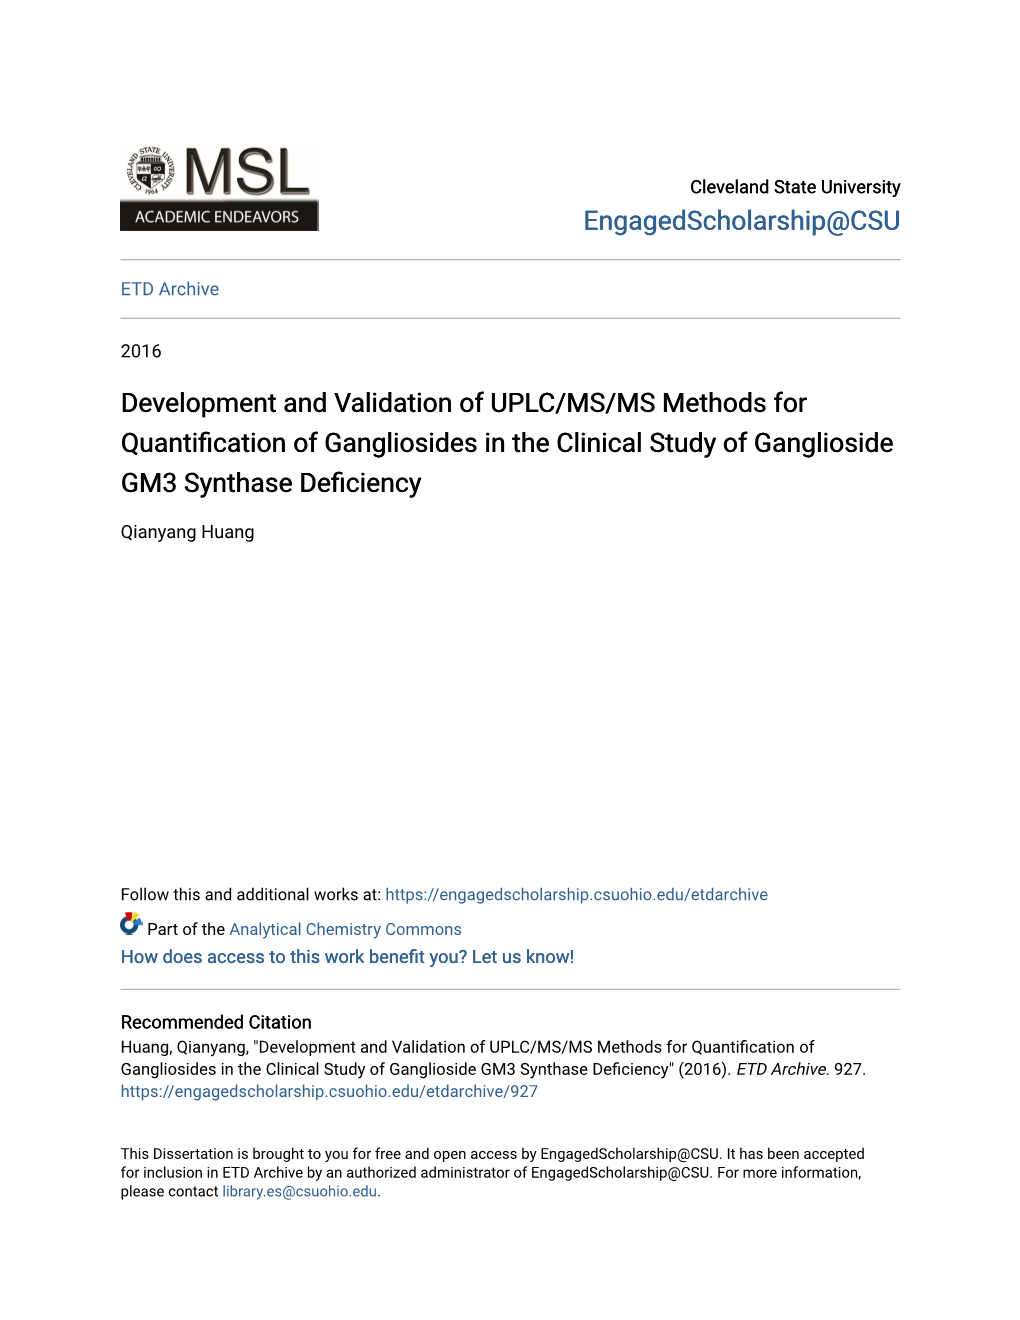 Development and Validation of UPLC/MS/MS Methods for Quantification of Gangliosides in the Clinical Study of Ganglioside GM3 Synthase Deficiency